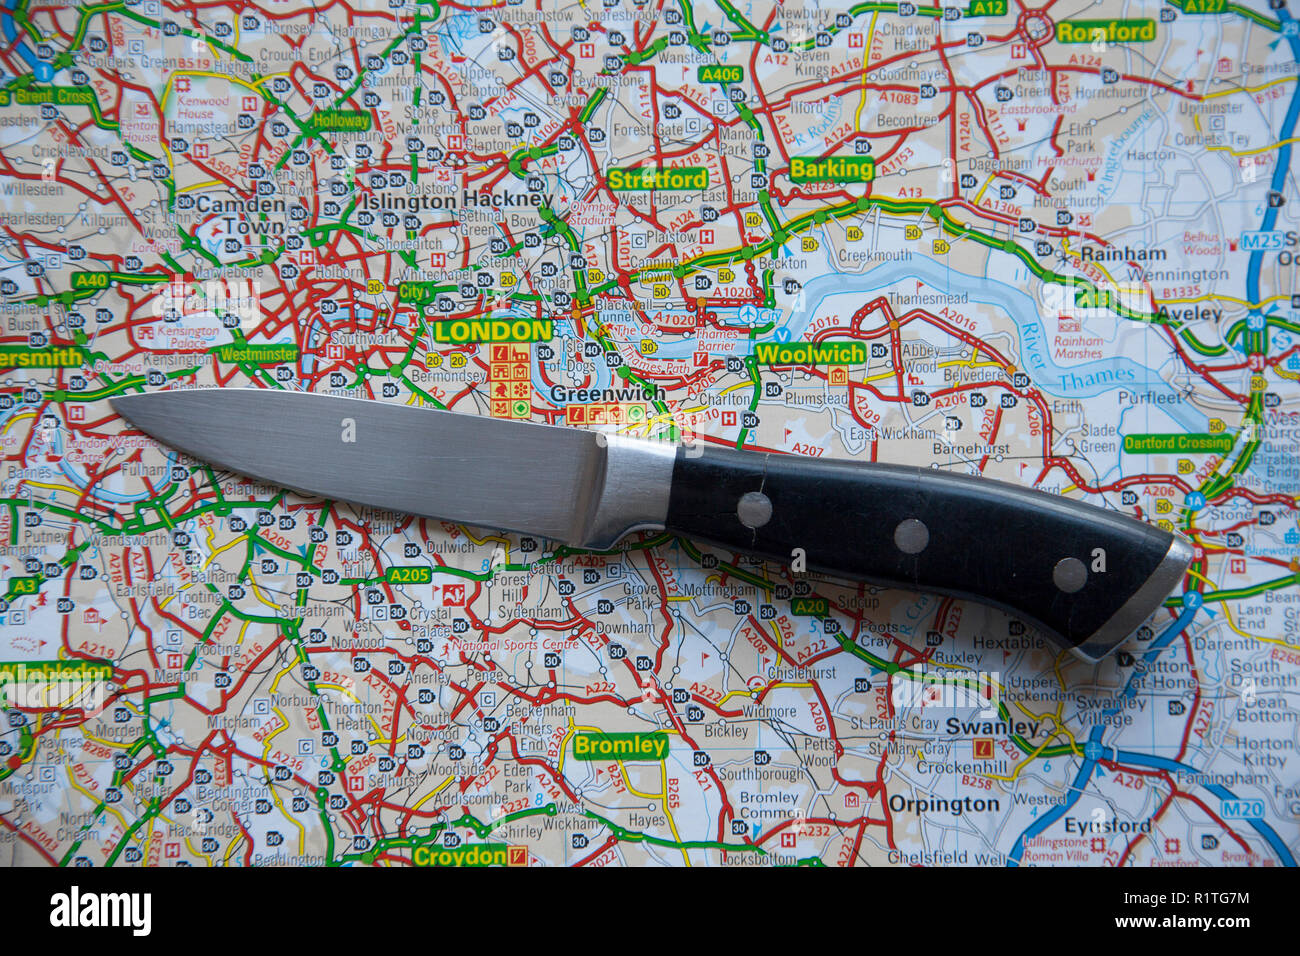 LONDON, UK - NOVEMBER 14th 2018: A knife on a map of London, England. Knife crime in London concept Stock Photo